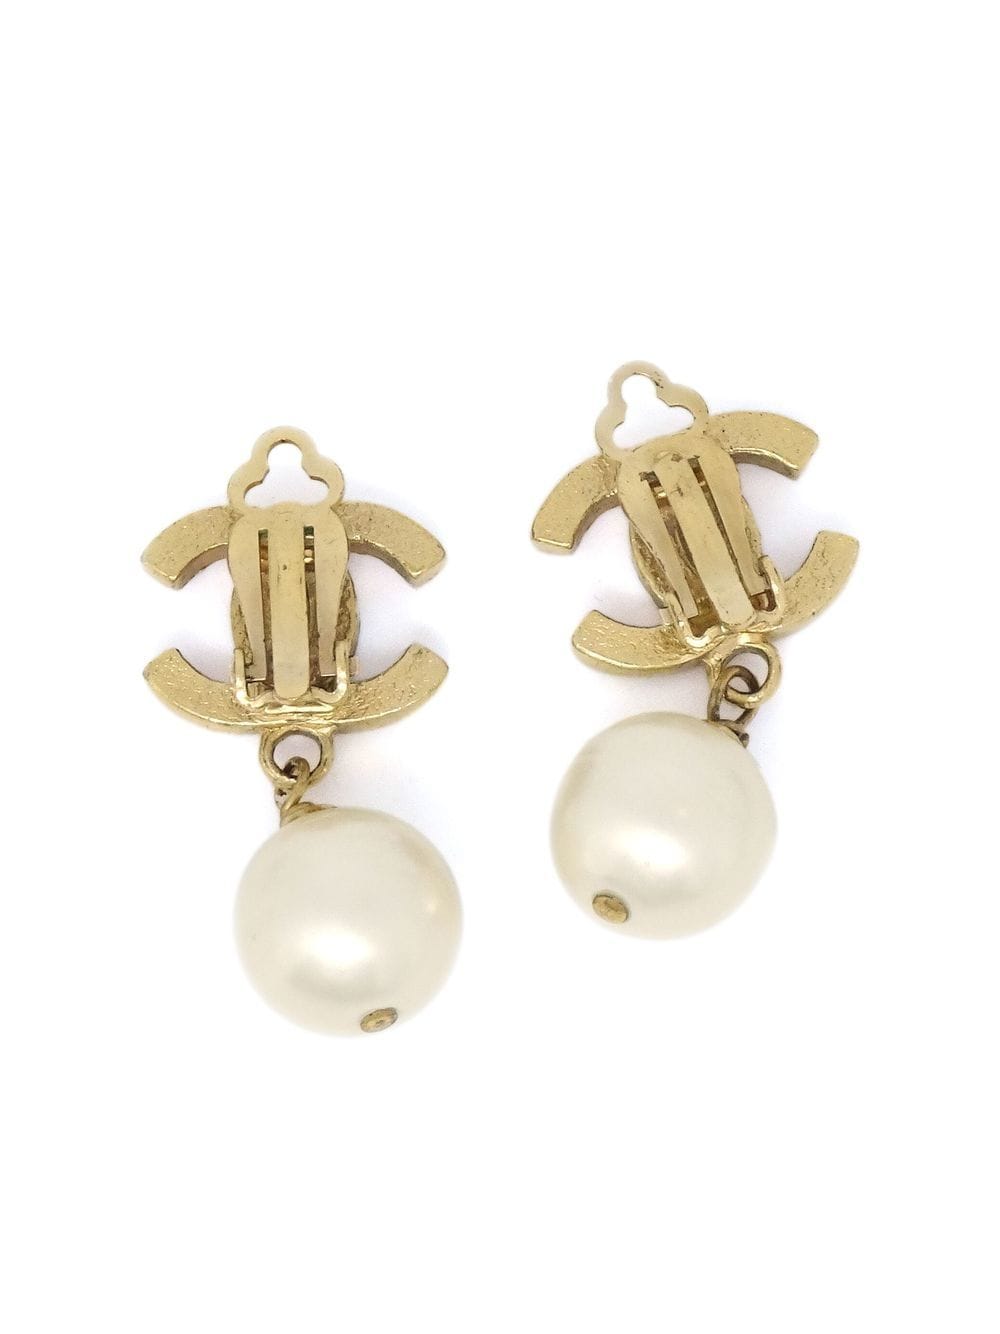 Chanel Pre-Owned 1994 bell motif dangling earrings - Gold - Wheretoget